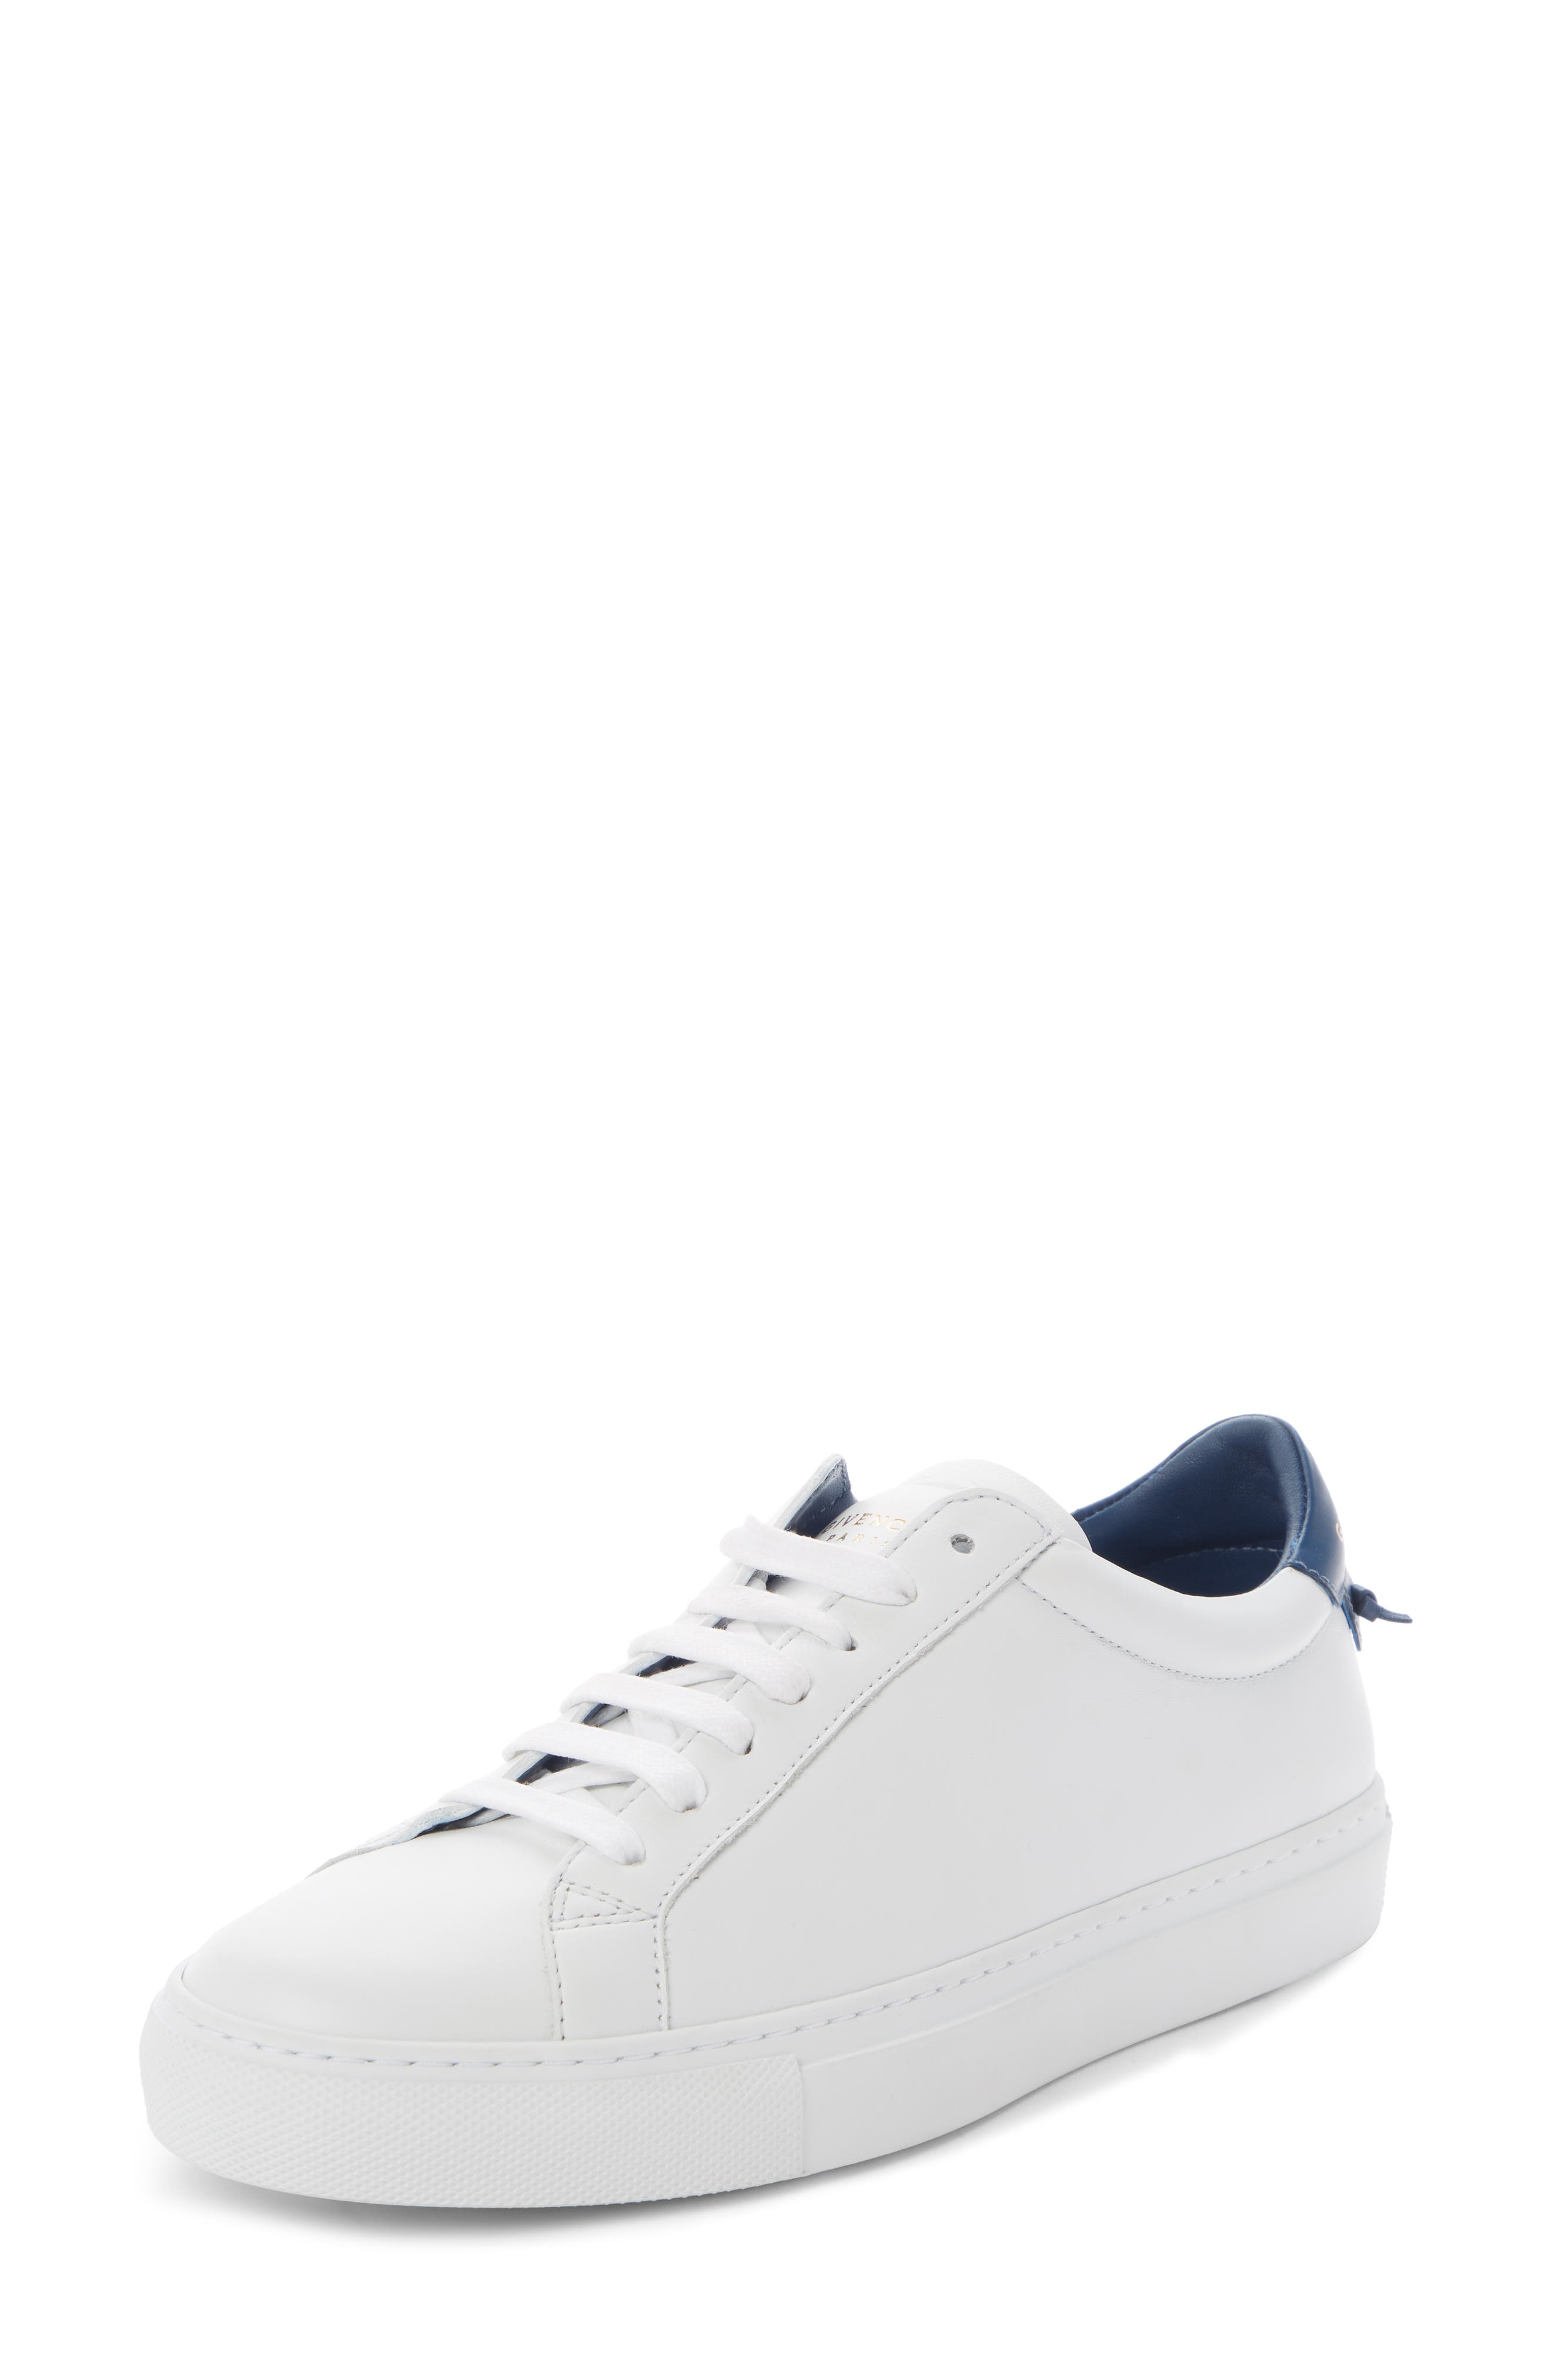 givenchy low top sneakers womens